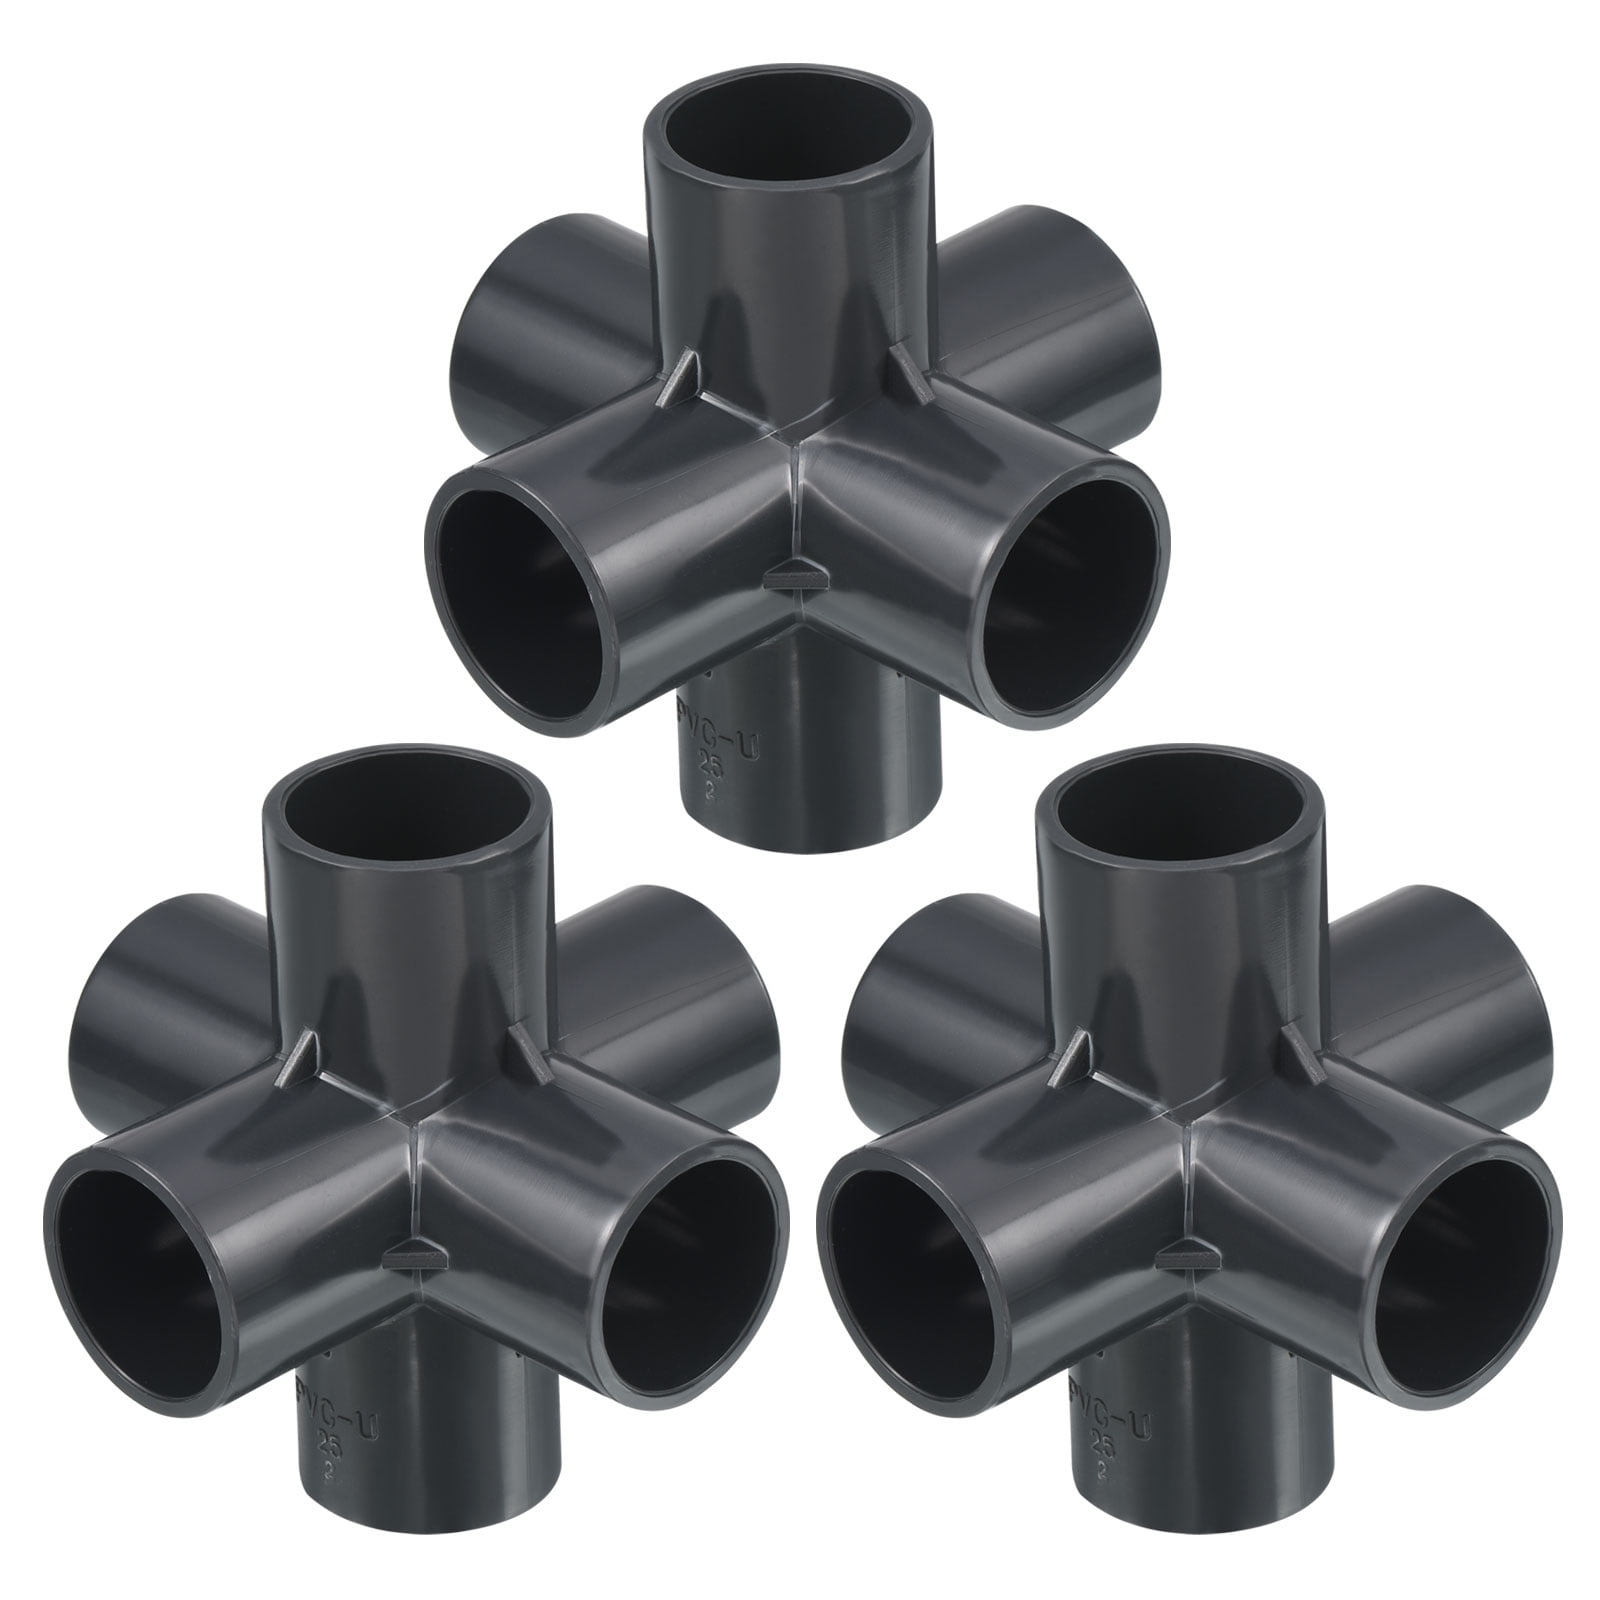 Uxcell 3/4 Inch UPVC Elbow Fitting 6 Way PVC Pipe Fittings Connector ...